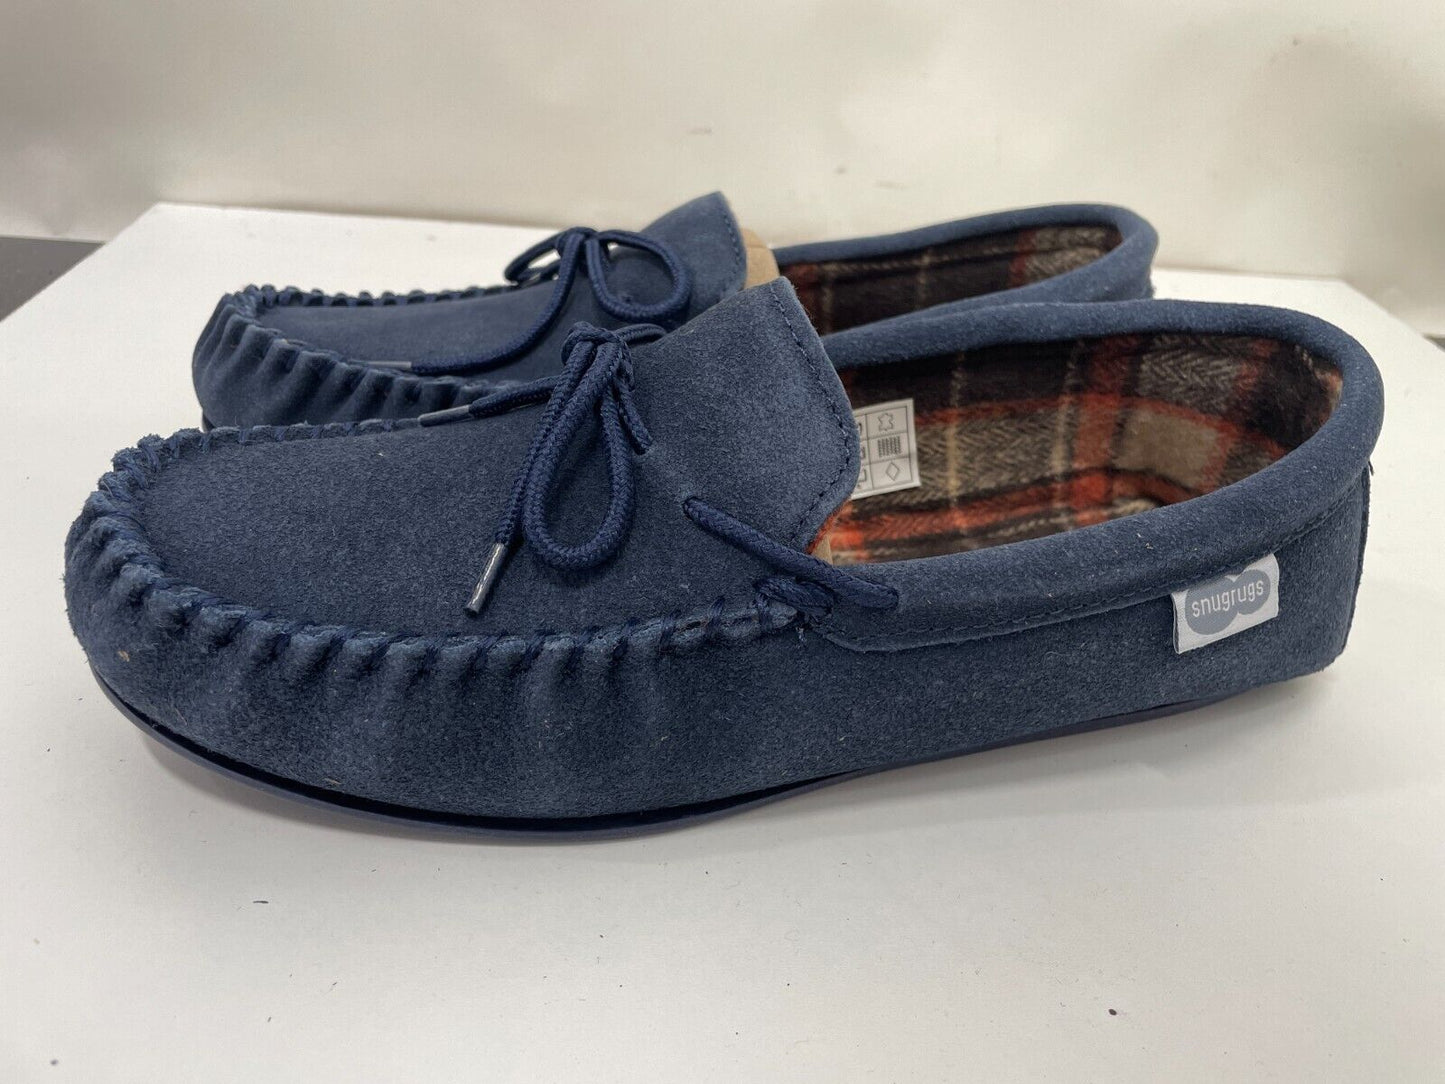 Snugrugs Mens 10 Genuine Suede Moccasin Slipper Navy Soft Step Cotton Lining